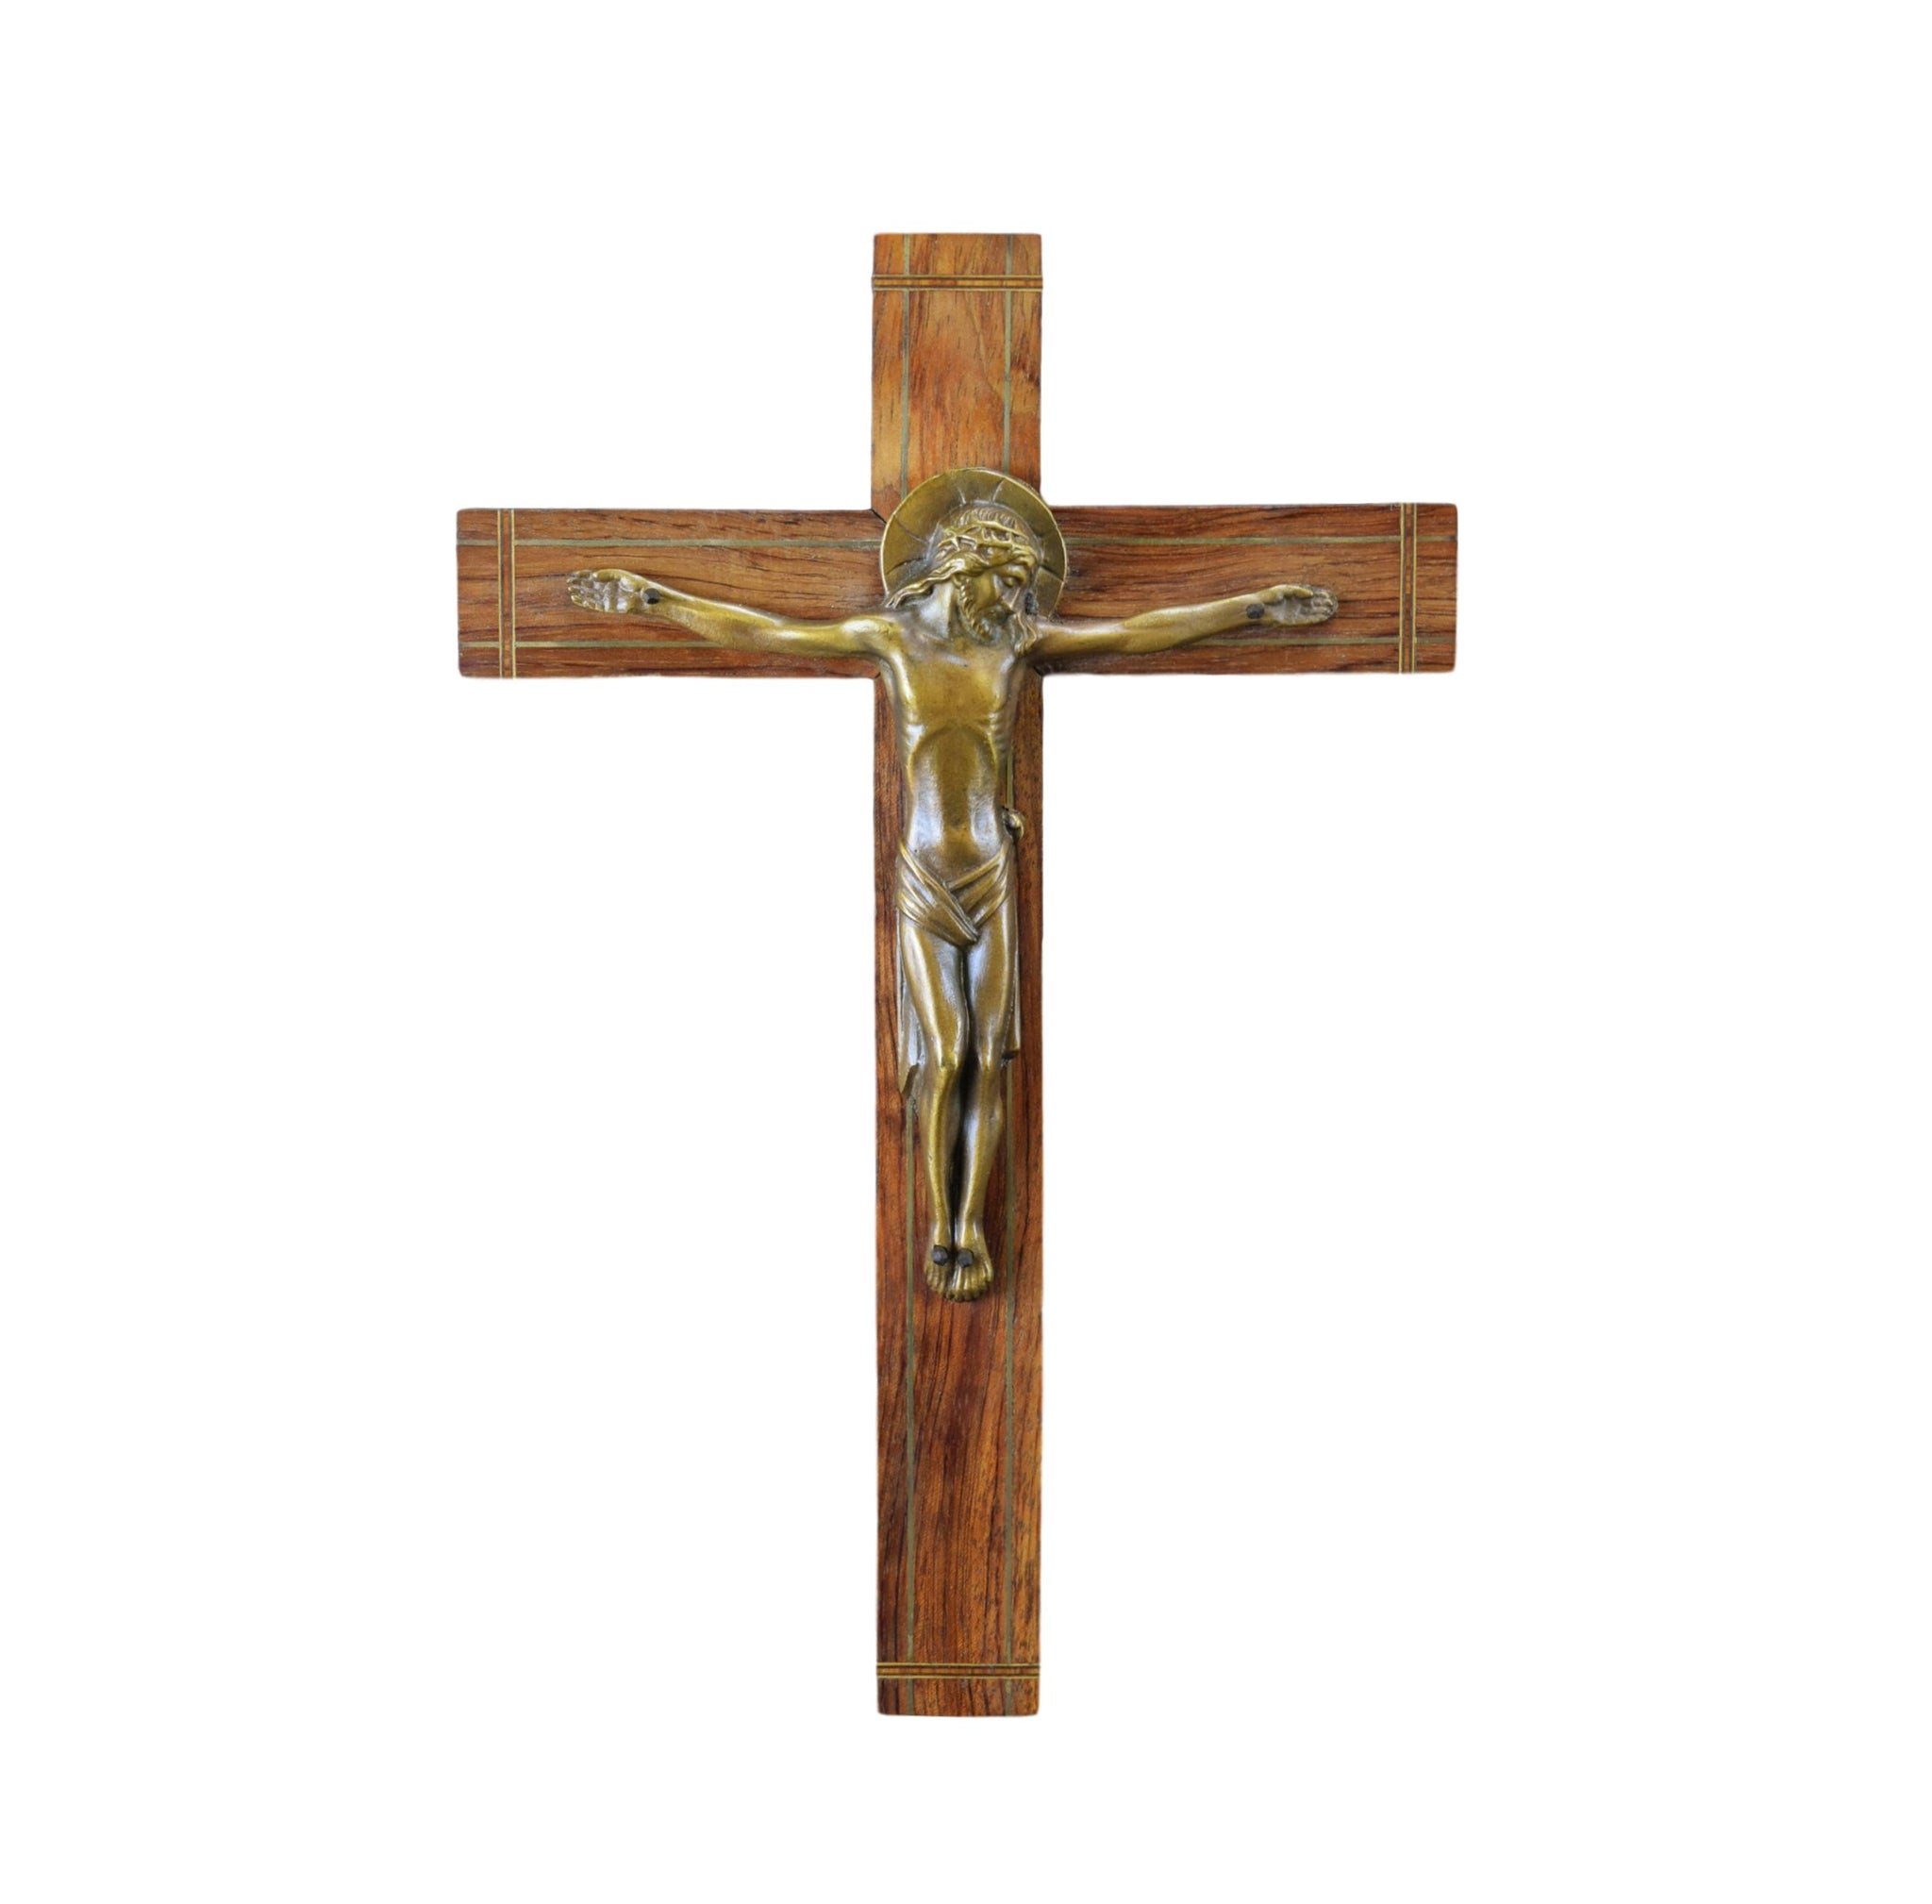 French Art Deco Gallo Bronze and Wood Wall Cross Crucifix